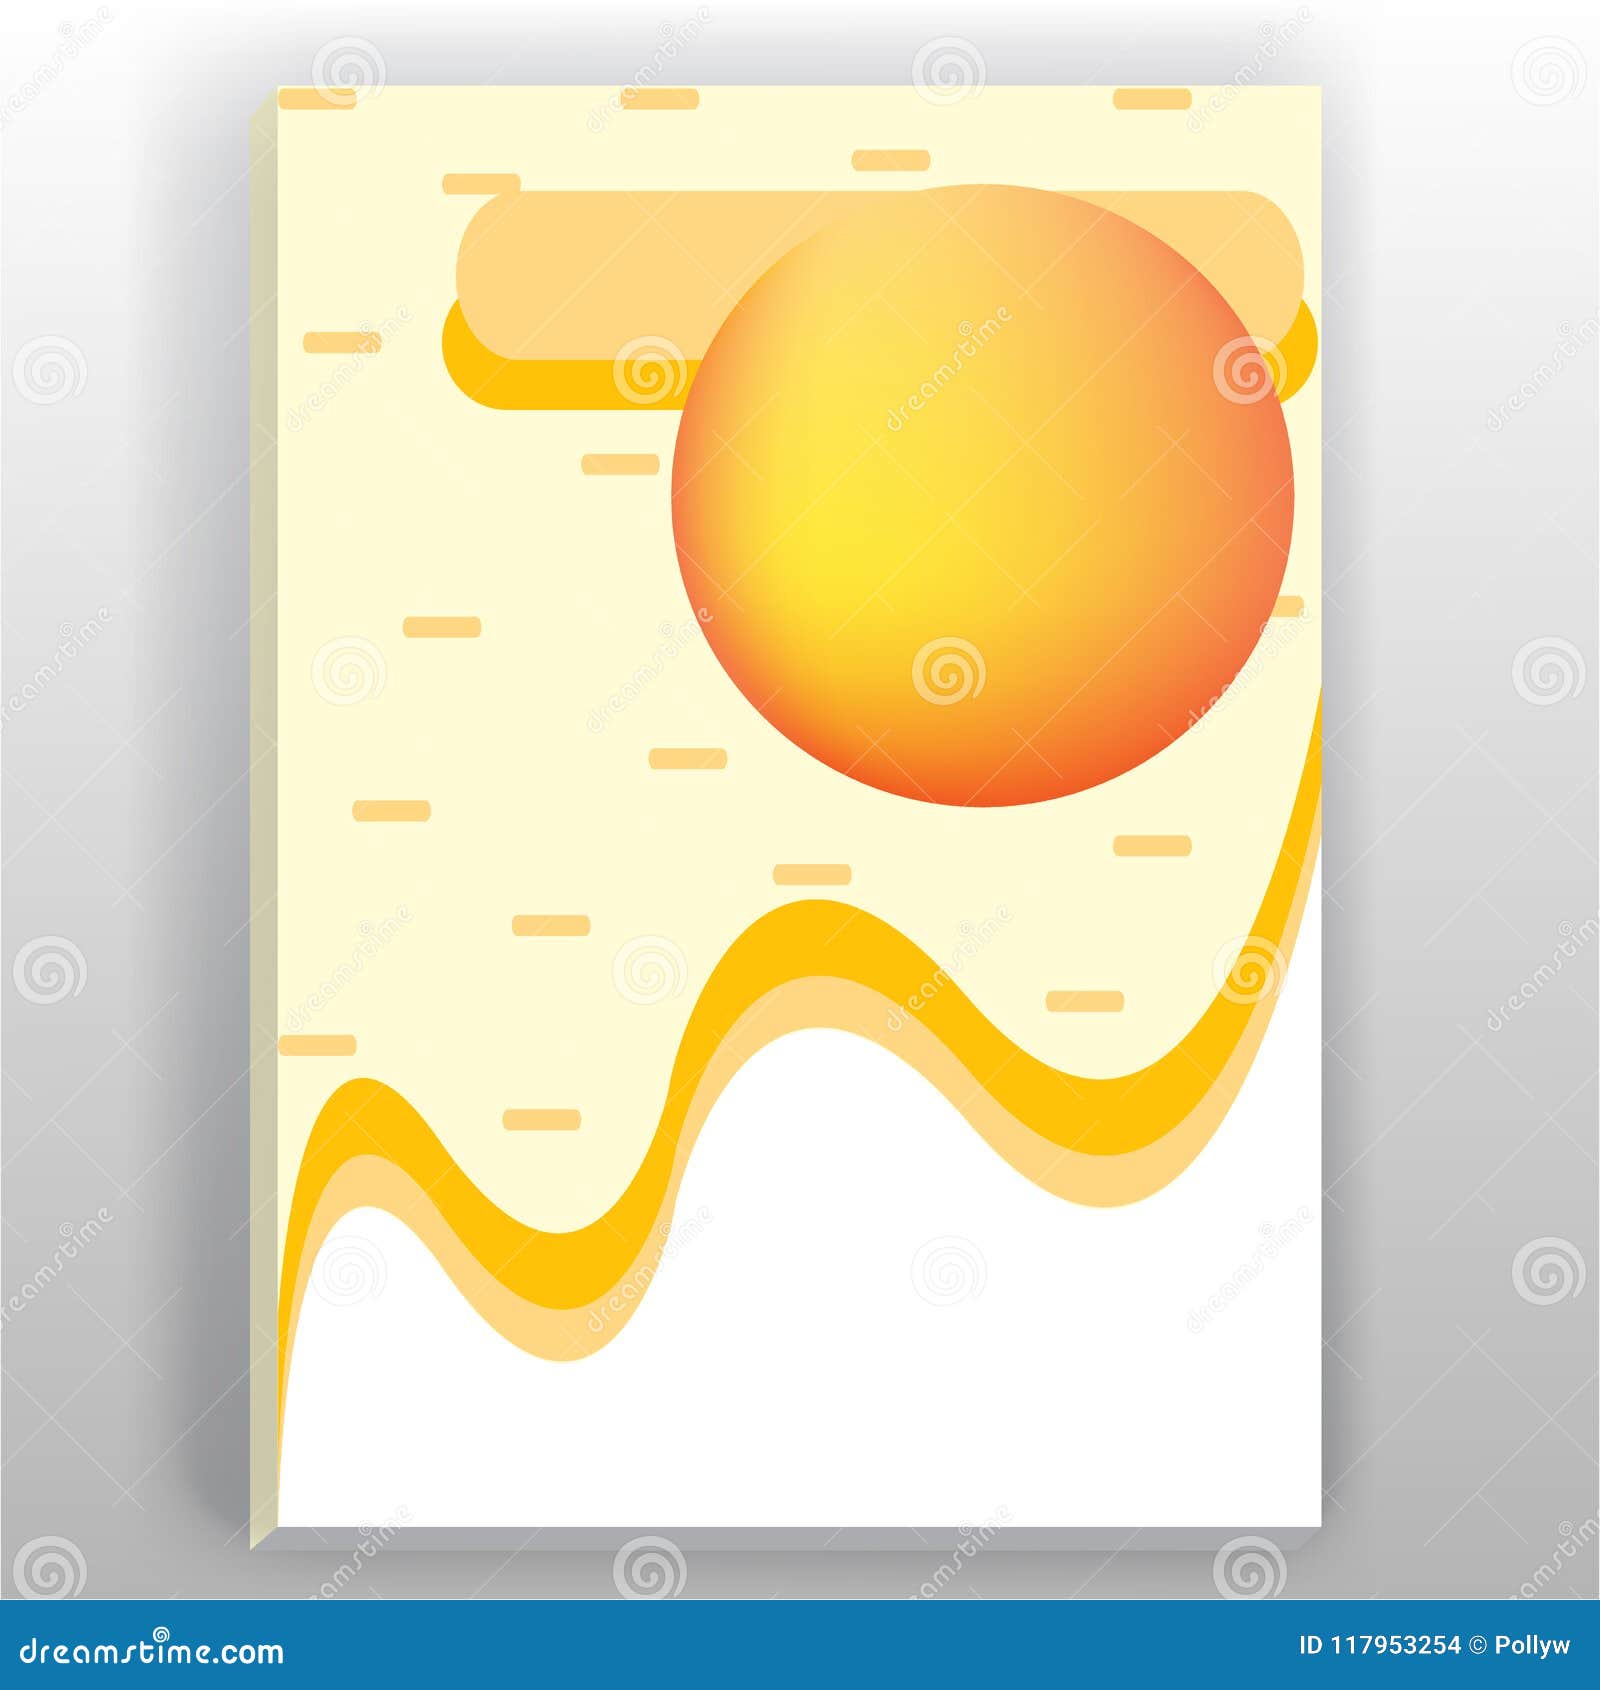 Yellow Orange Page Template , Book Cover Stock Vector - Illustration of  minimal, modern: 117953254